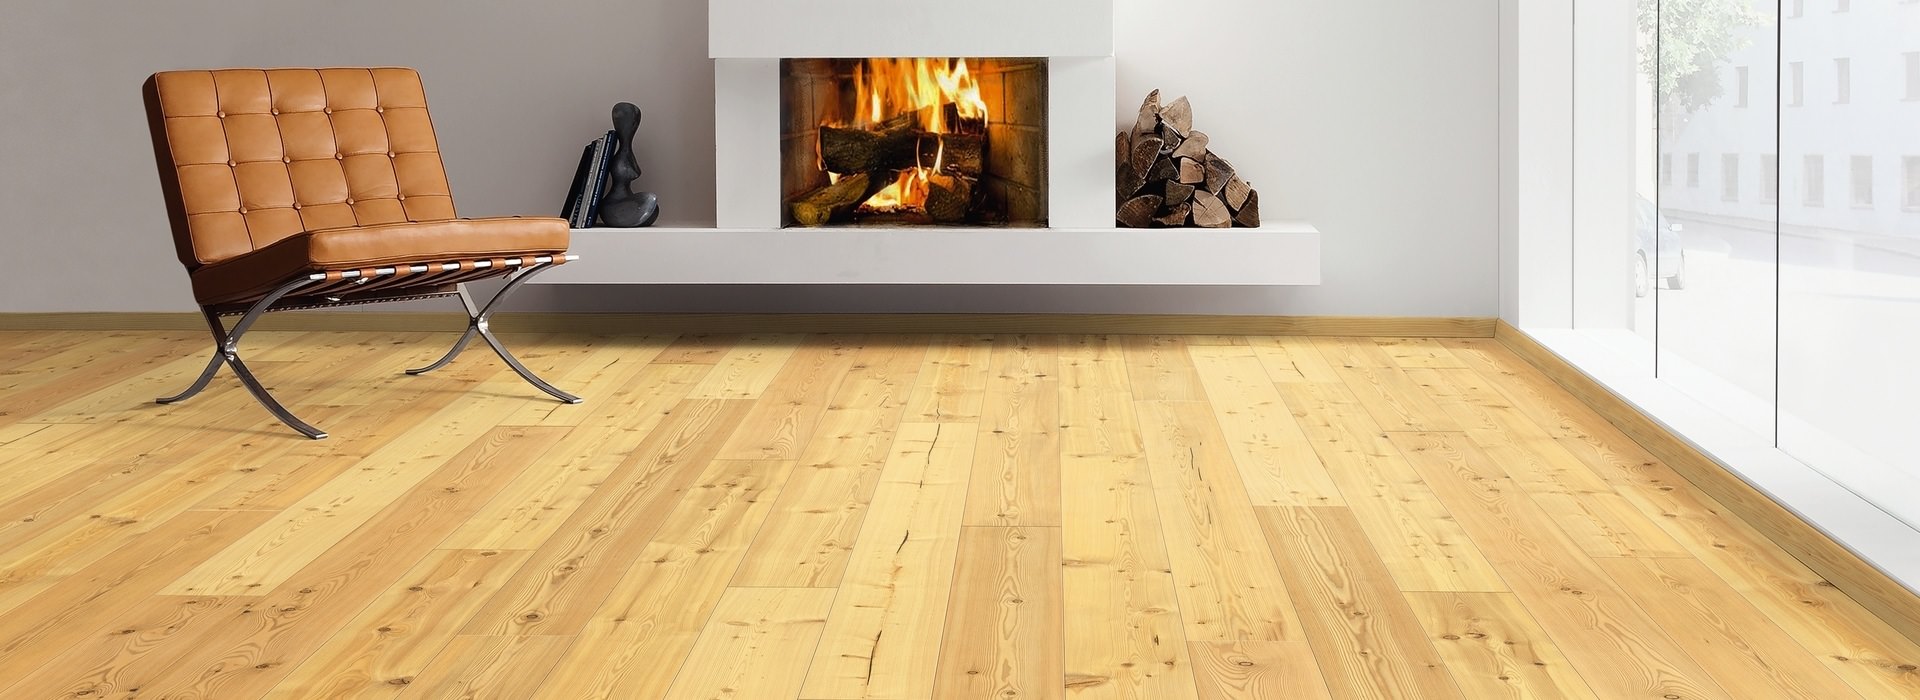 HARO PARQUET 4000 Plank 1-Strip 180 4V Larch Universal brushed naturaLin plus Top Connect